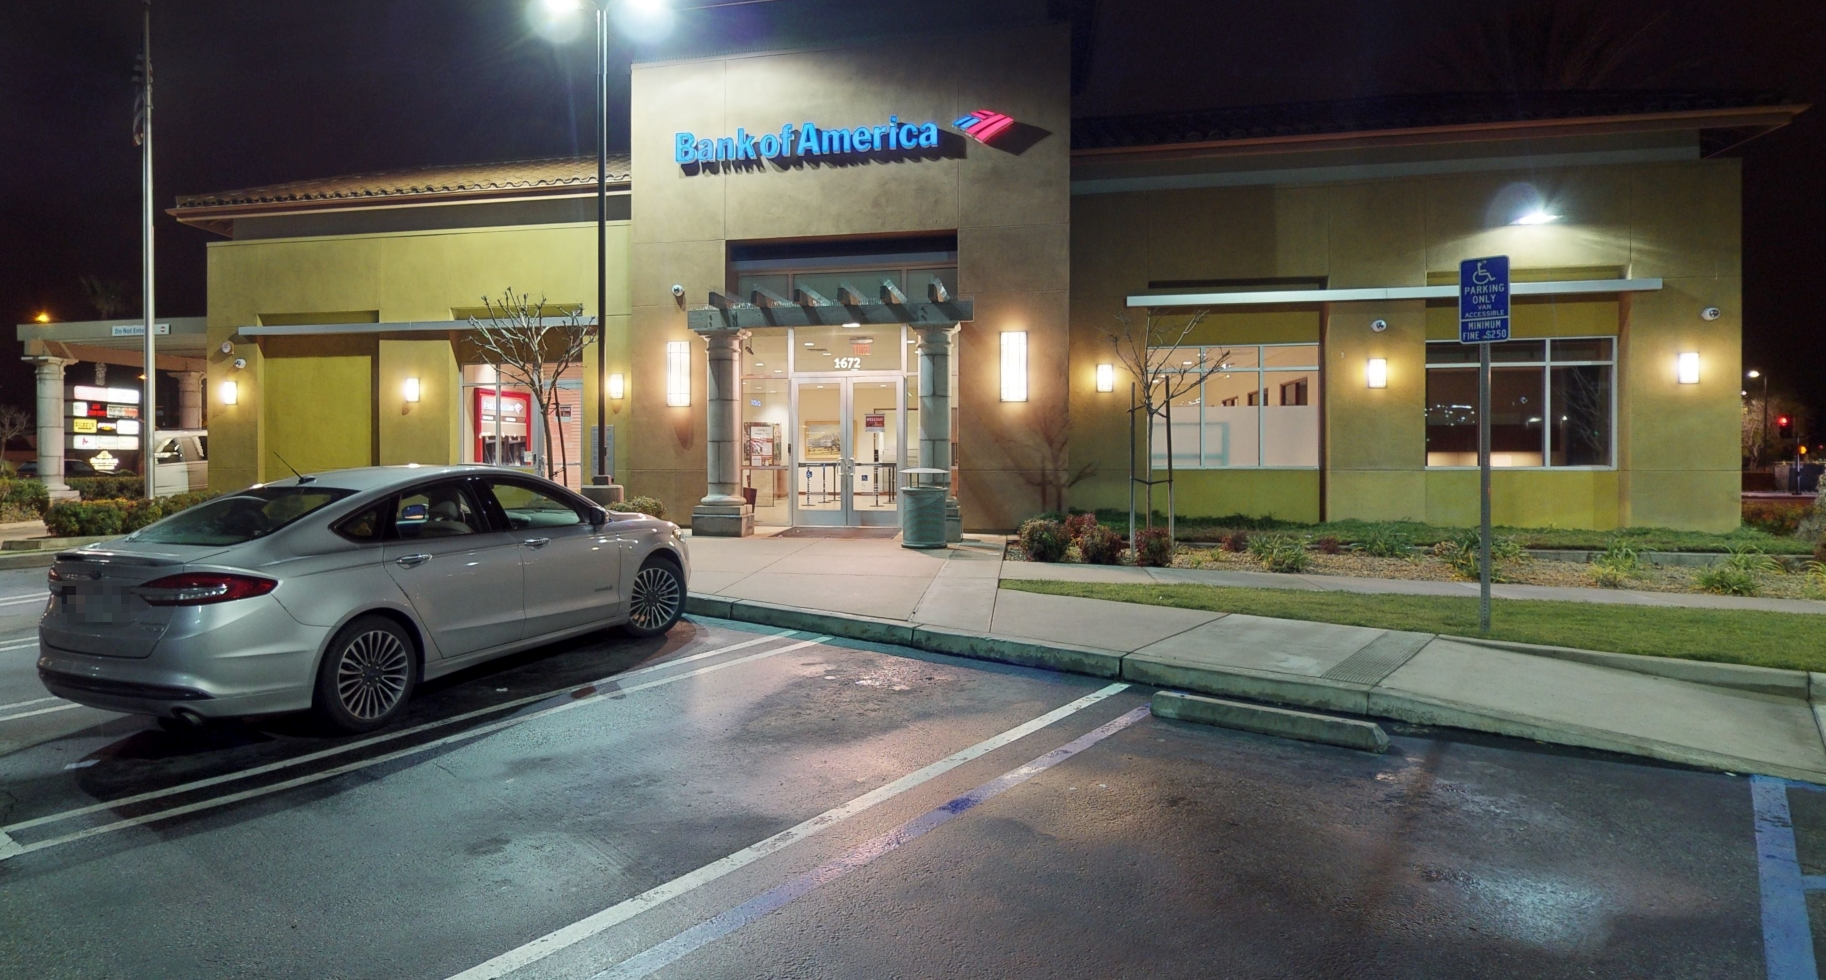 Bank of America financial center with drive-thru ATM | 1672 E 2nd St, Beaumont, CA 92223